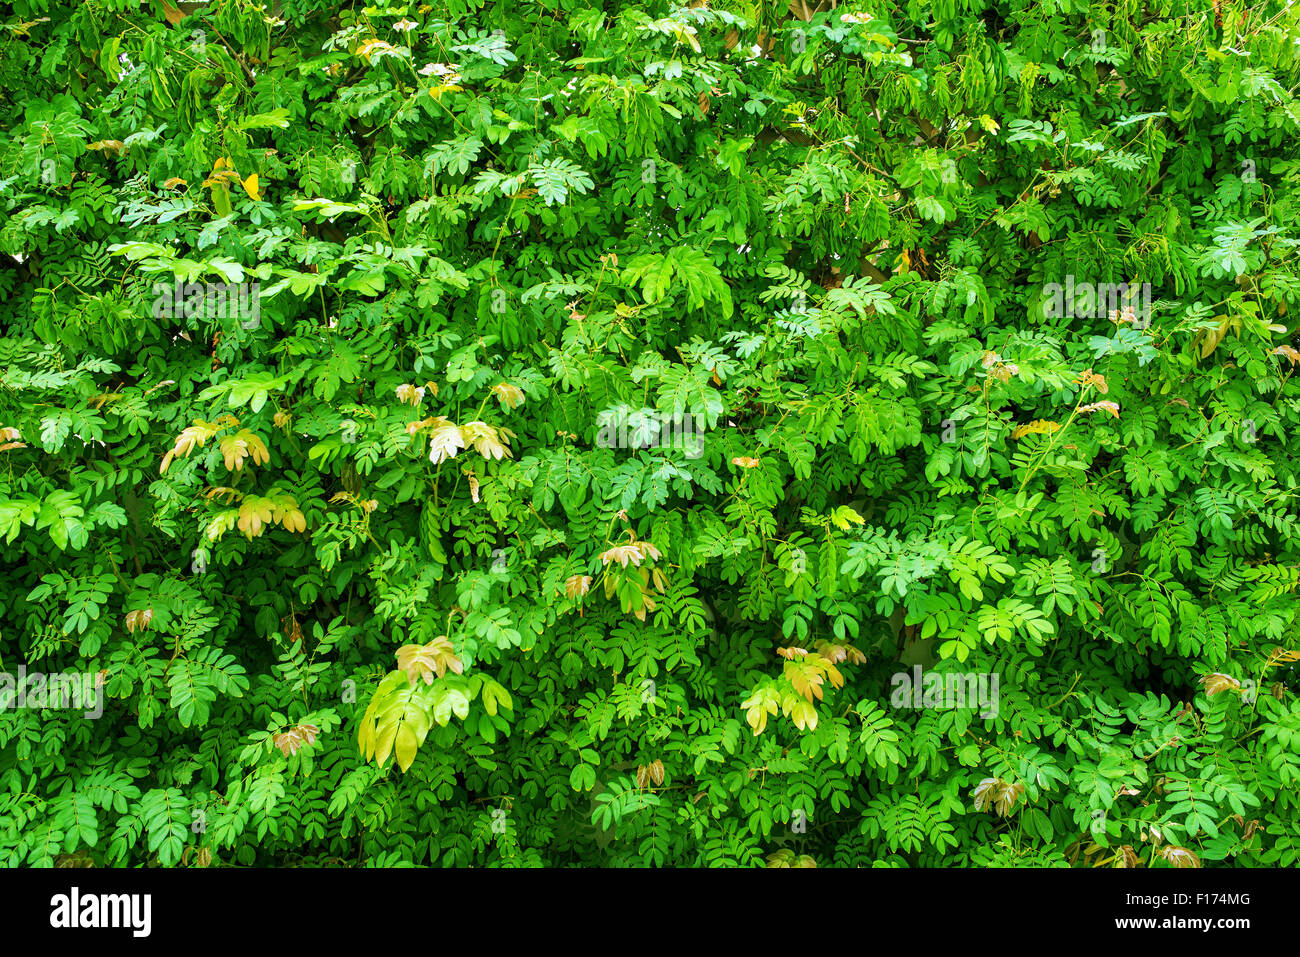 Green Plants Background. Nature Backdrop. Stock Photo